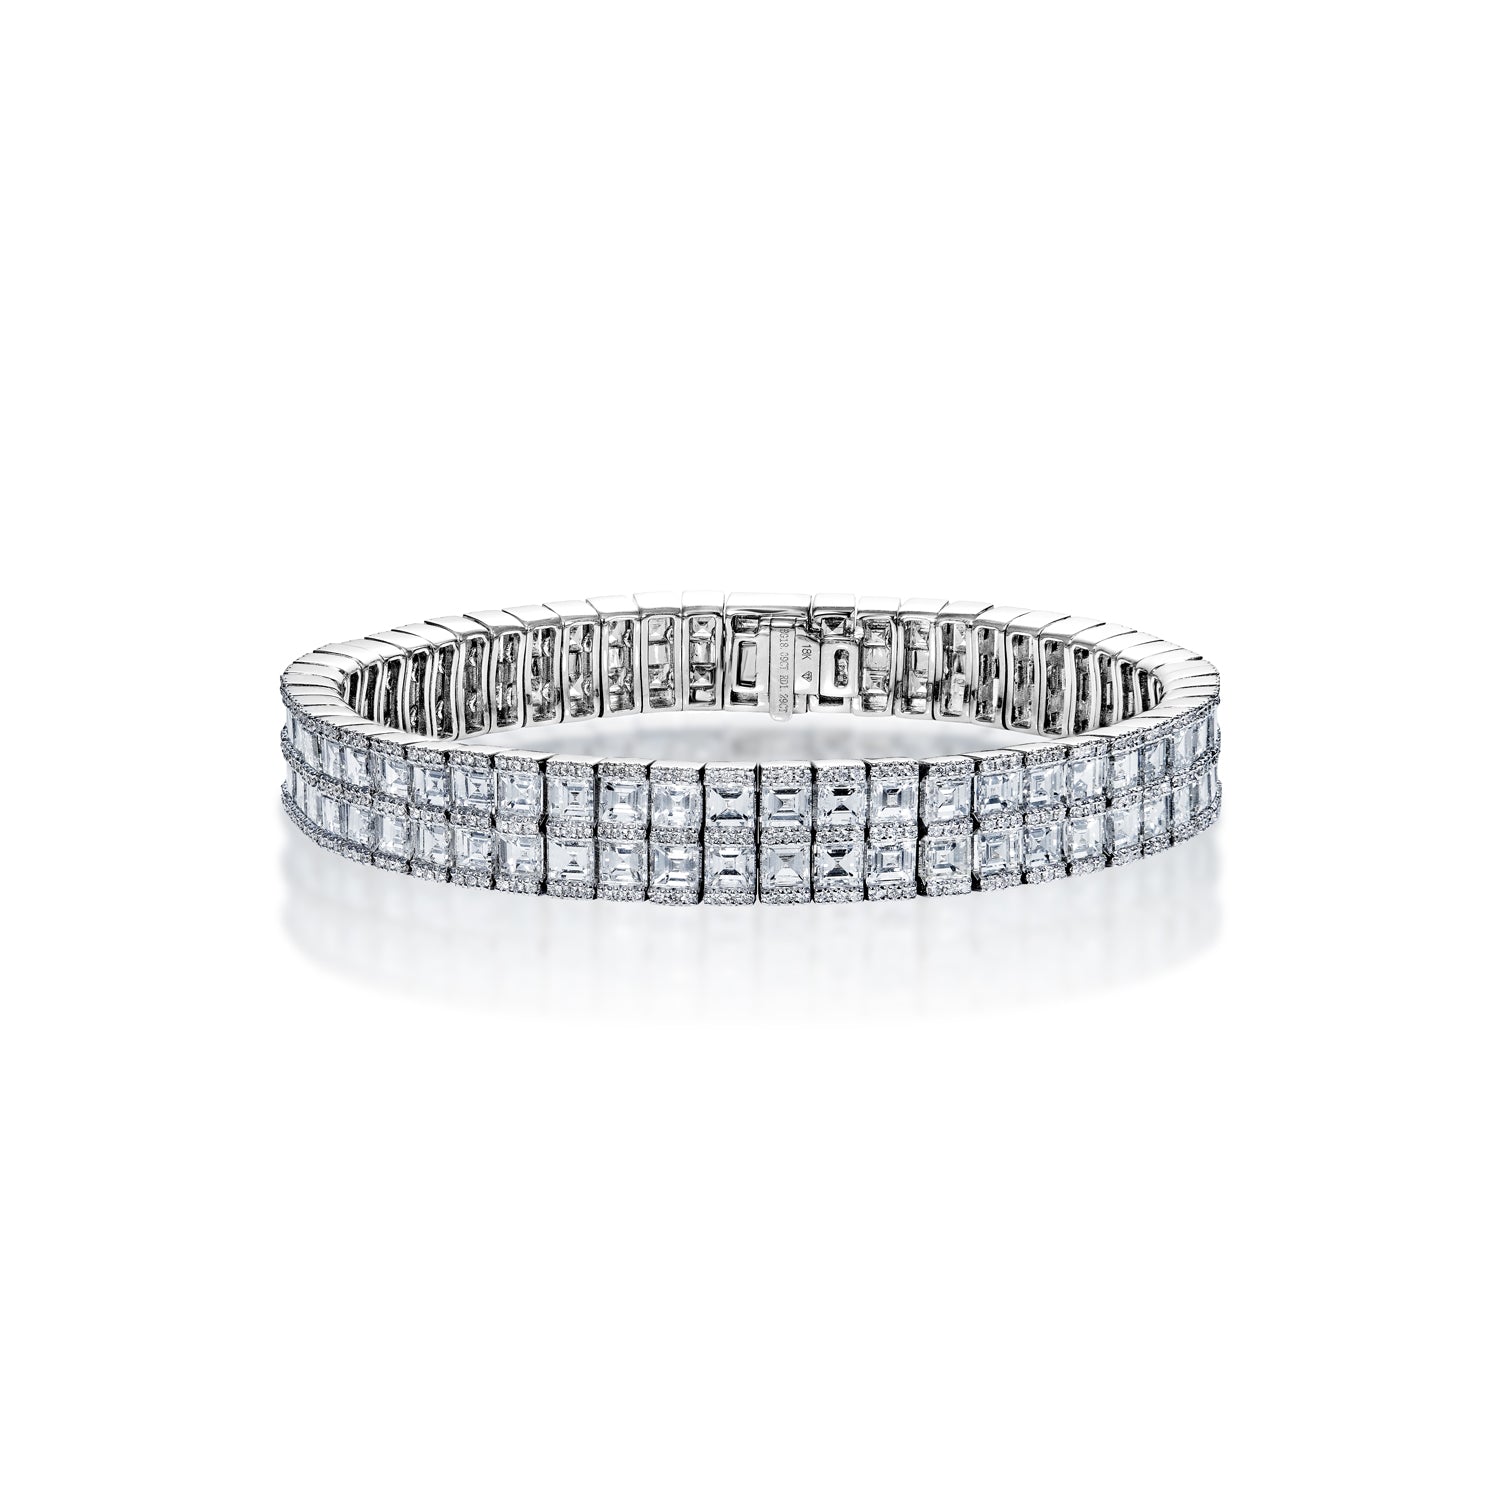 Carre 19 Carats Combine Mixed Shape Diamond Double Row Bracelet in 18k White Gold Full view